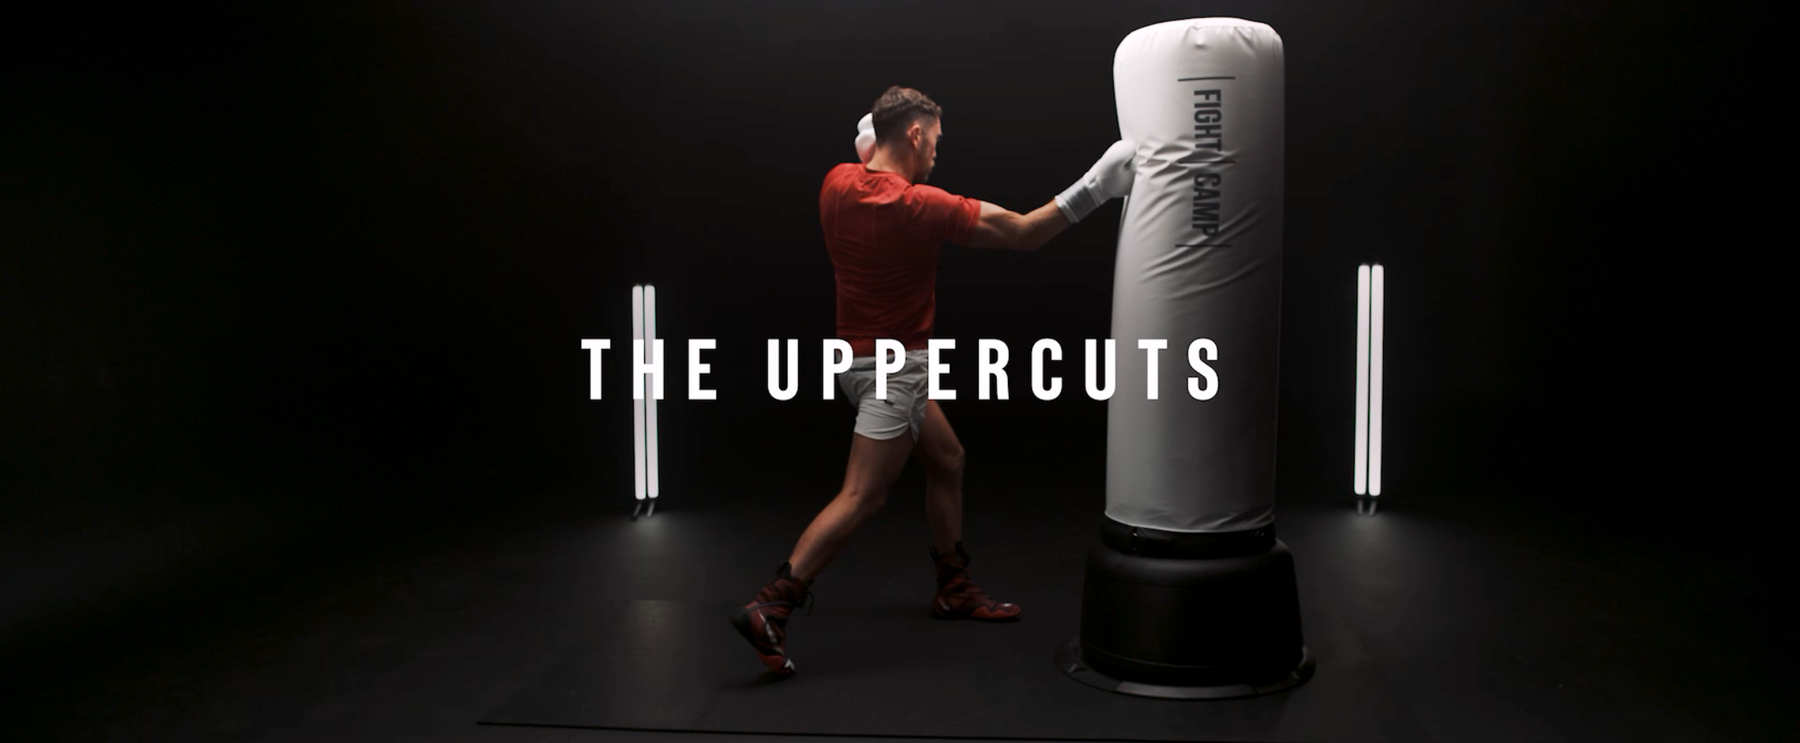 How To Throw Boxing Rear & Lead Uppercut Punches